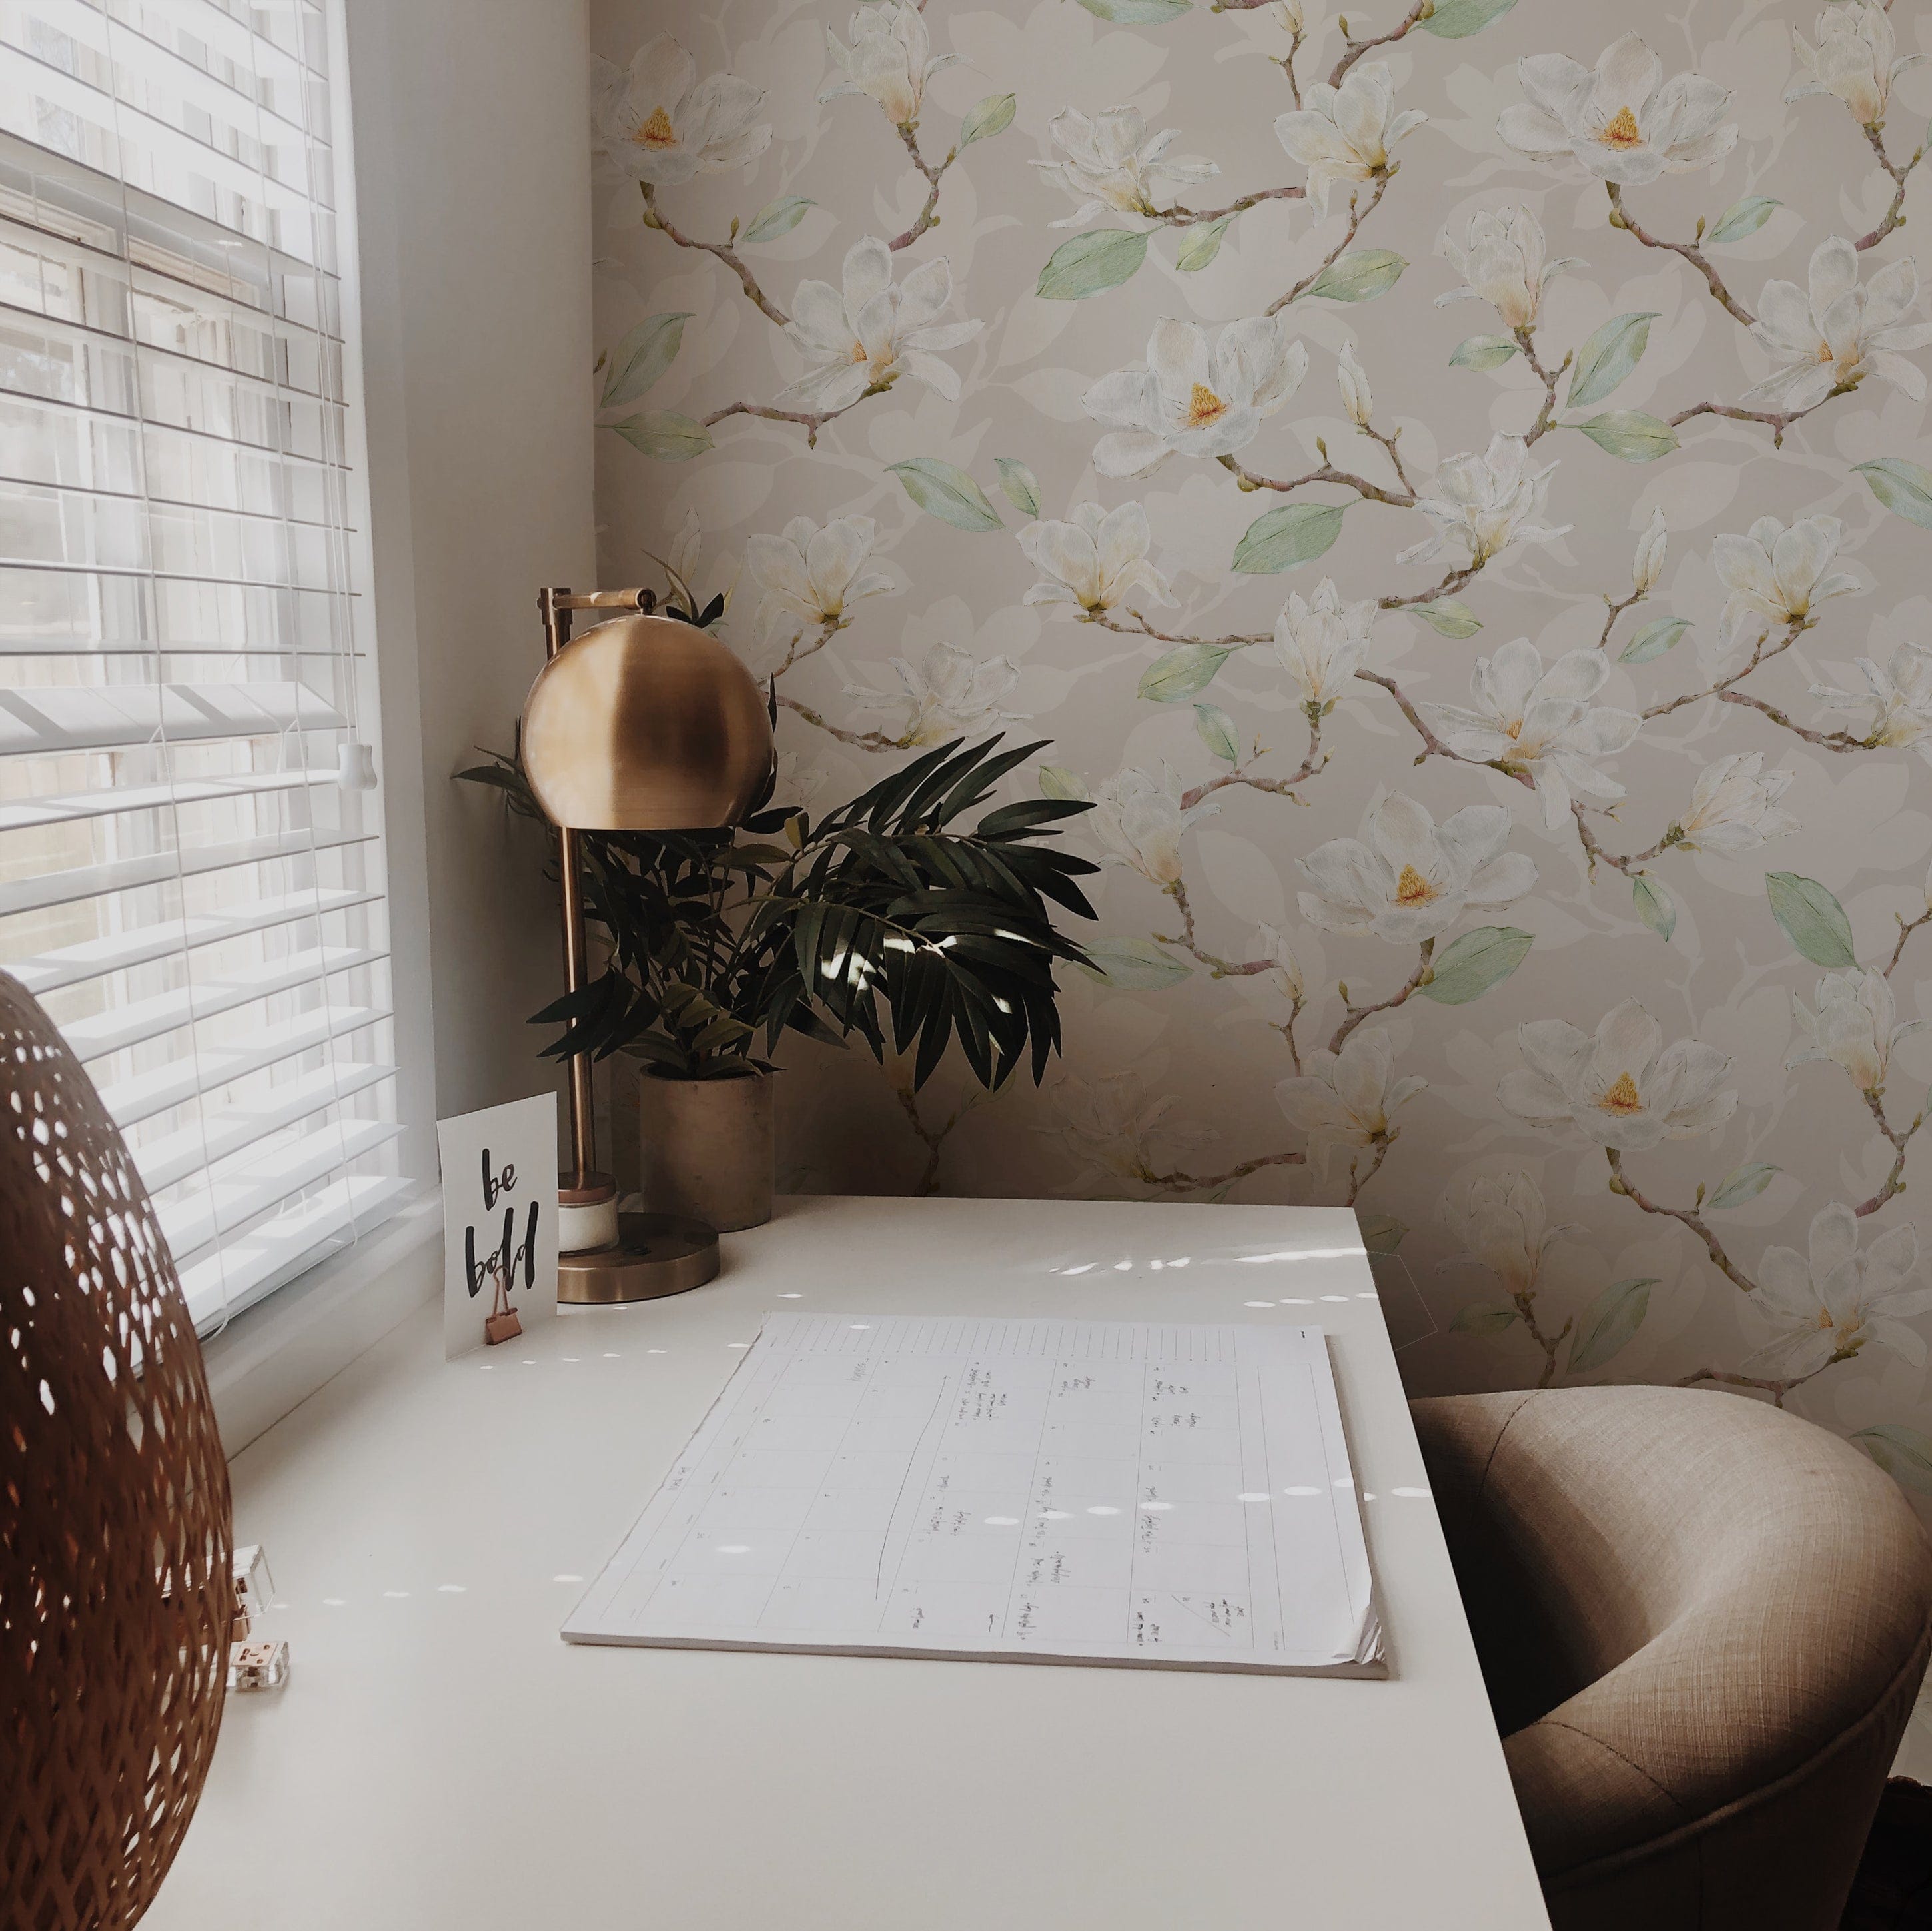 A tranquil corner of a room illuminated by natural light from a window, showcasing an elegant floral wallpaper with large magnolia flowers in soft hues, complemented by a modern desk lamp and indoor plants.